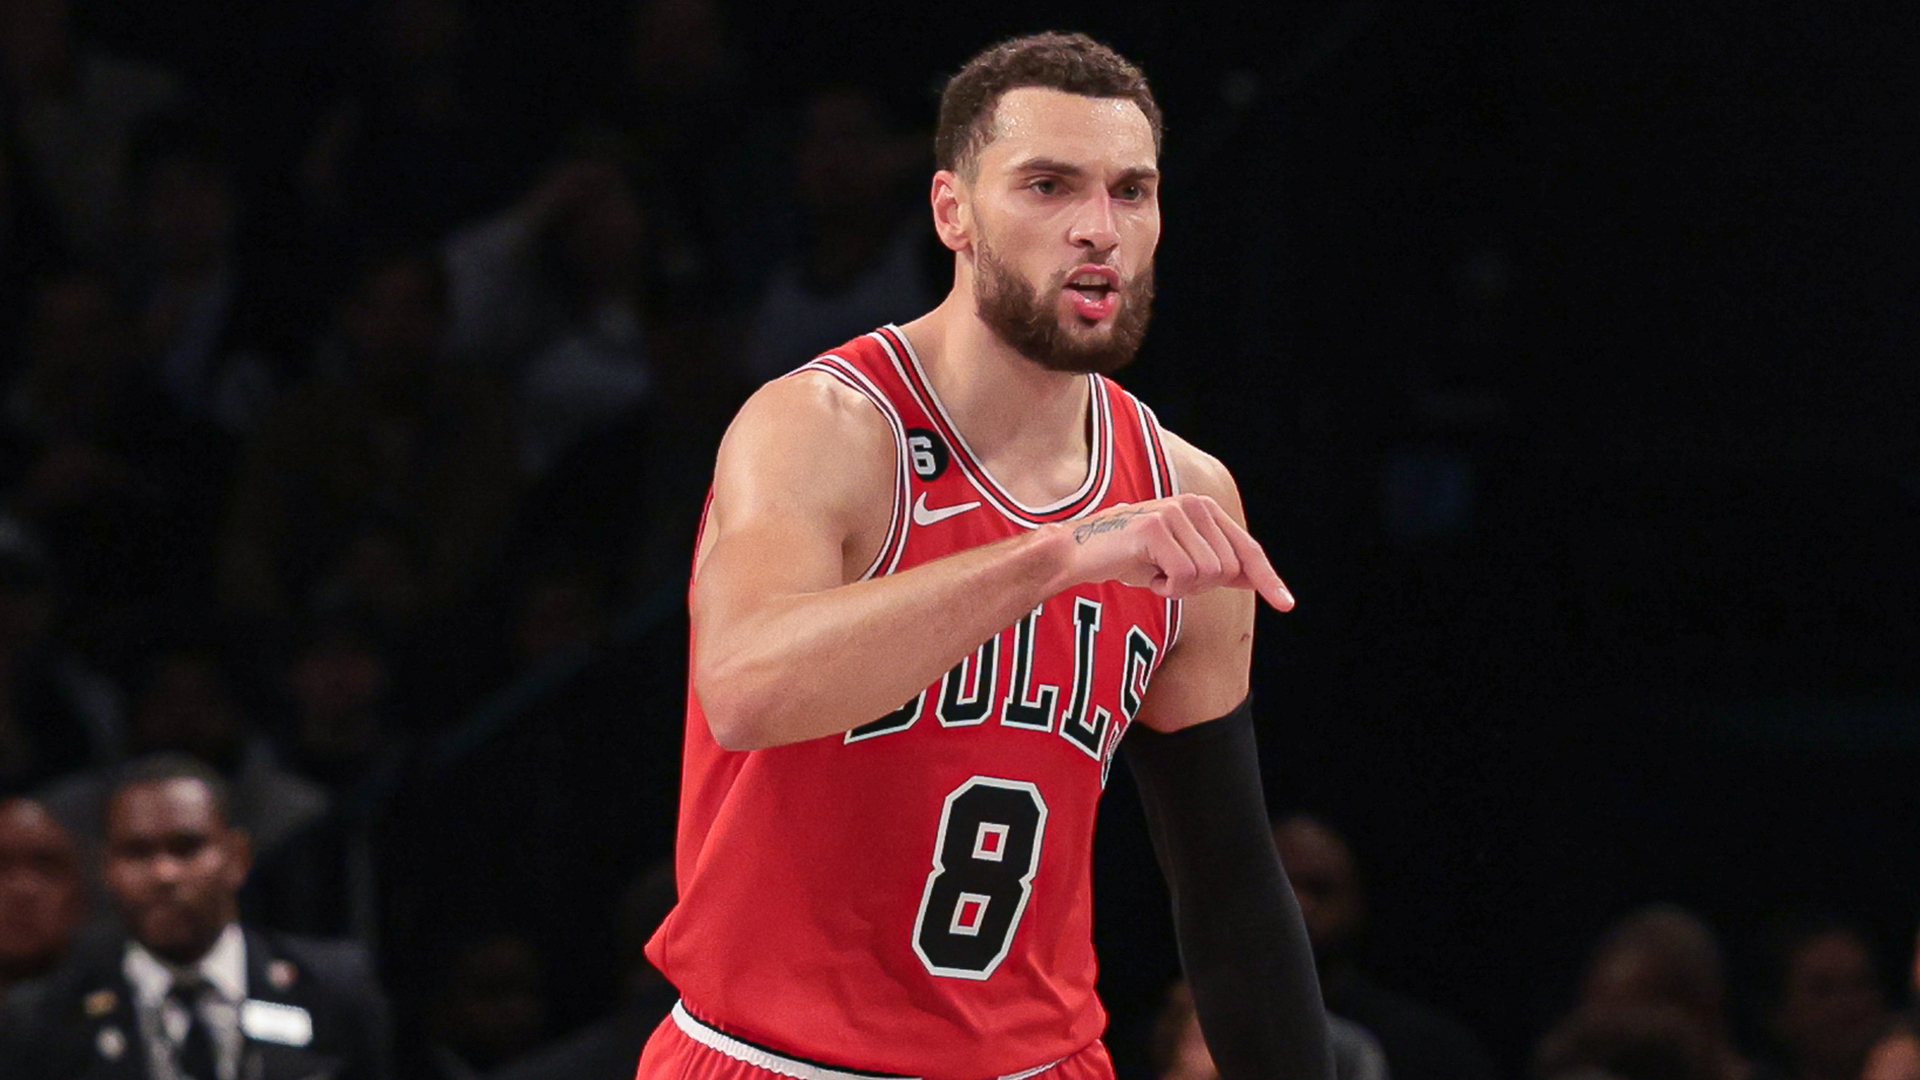 Zach LaVine developing into one of the NBA's most lethal shooters